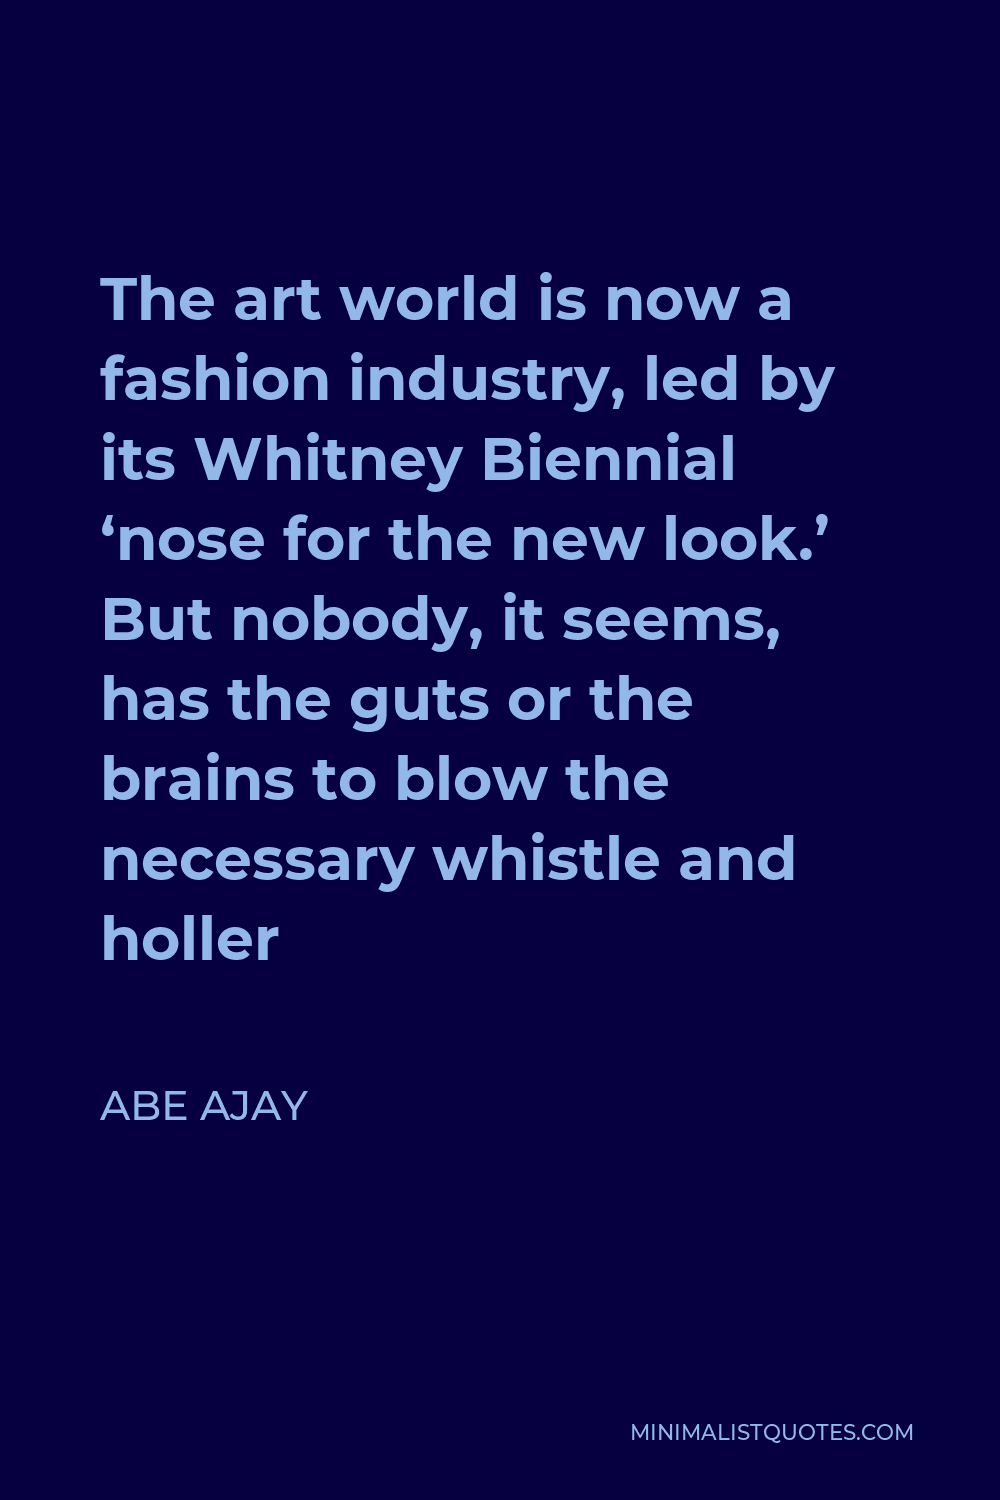 Abe Ajay Quote - The art world is now a fashion industry, led by its Whitney Biennial ‘nose for the new look.’ But nobody, it seems, has the guts or the brains to blow the necessary whistle and holler